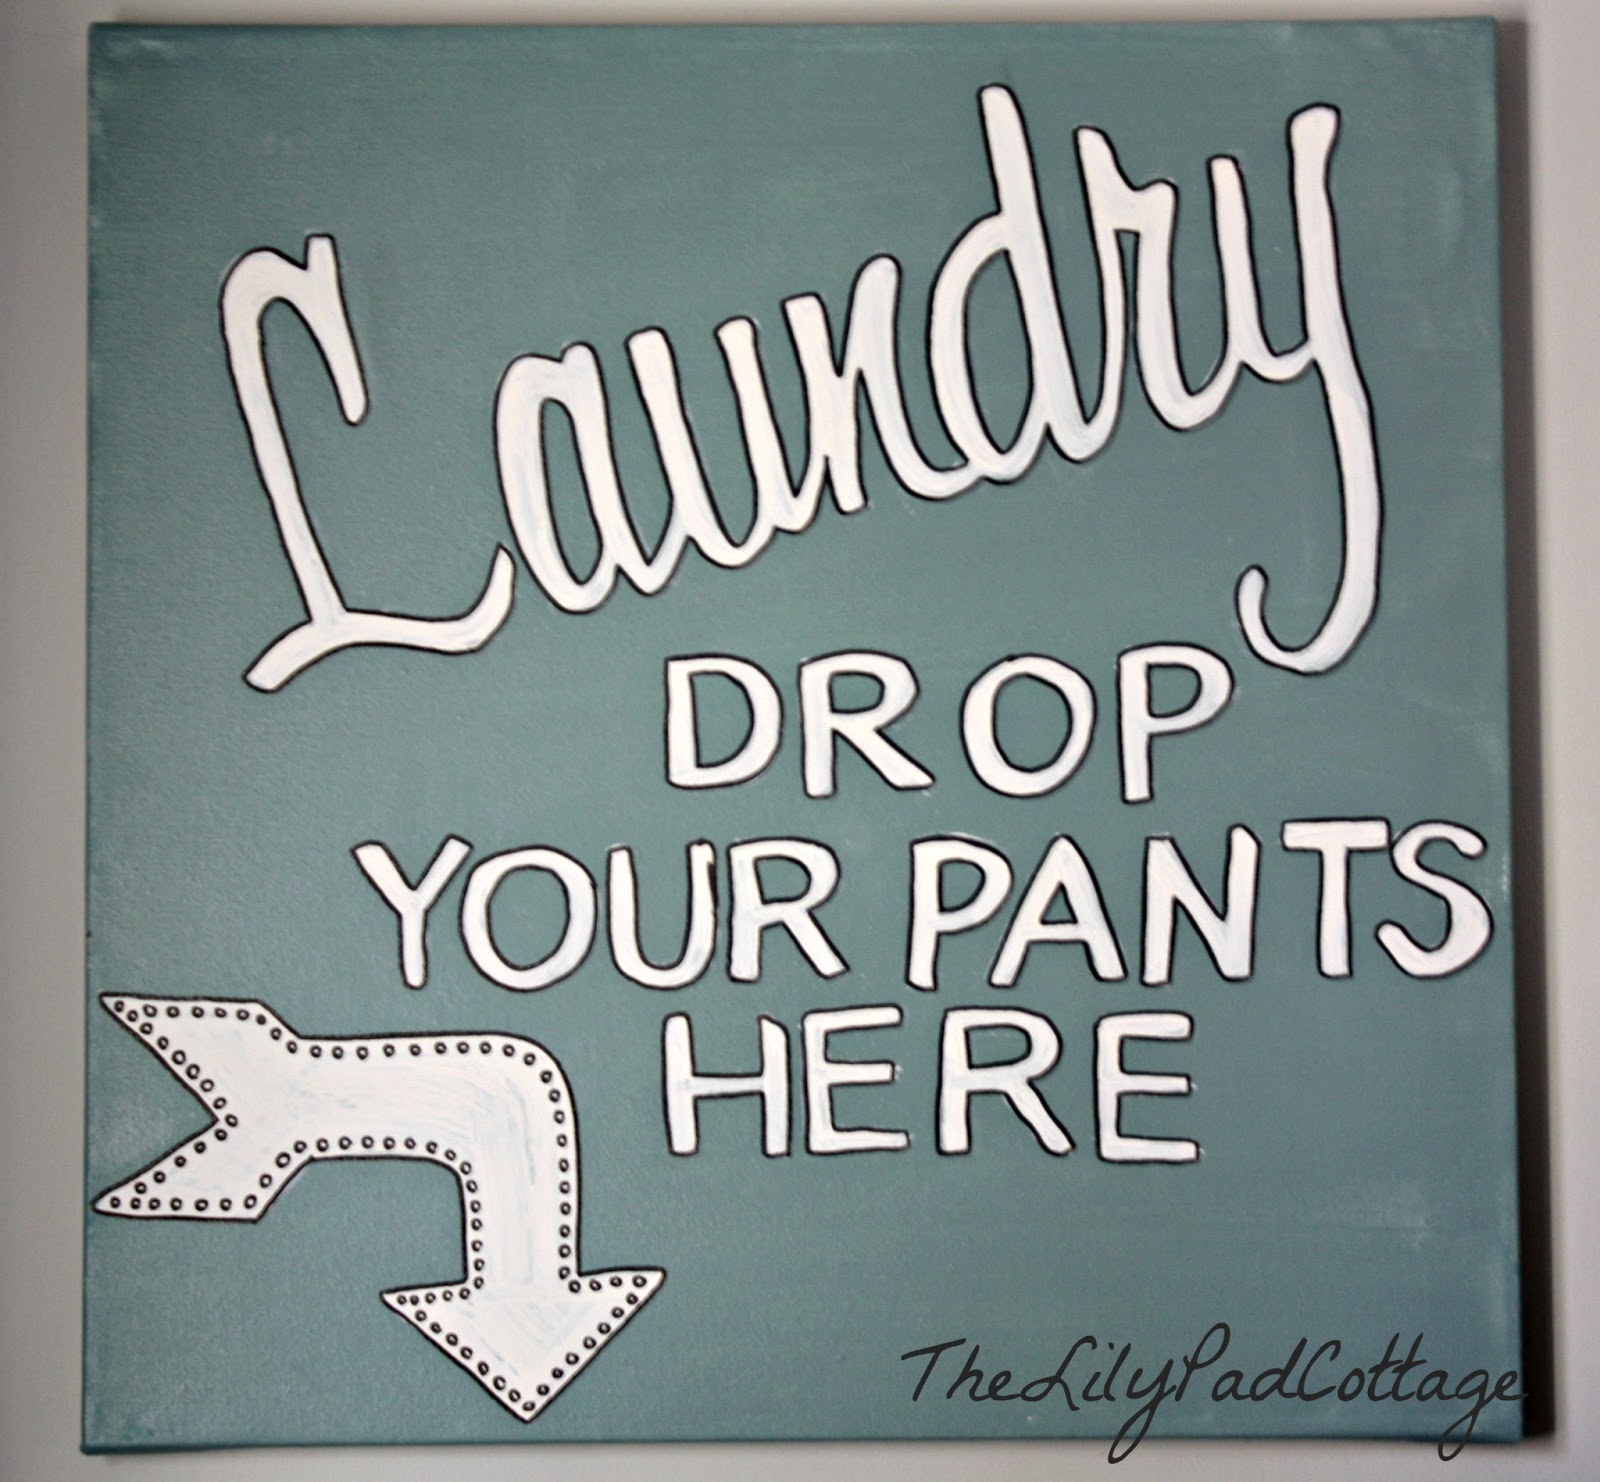 Printable Laundry Signs